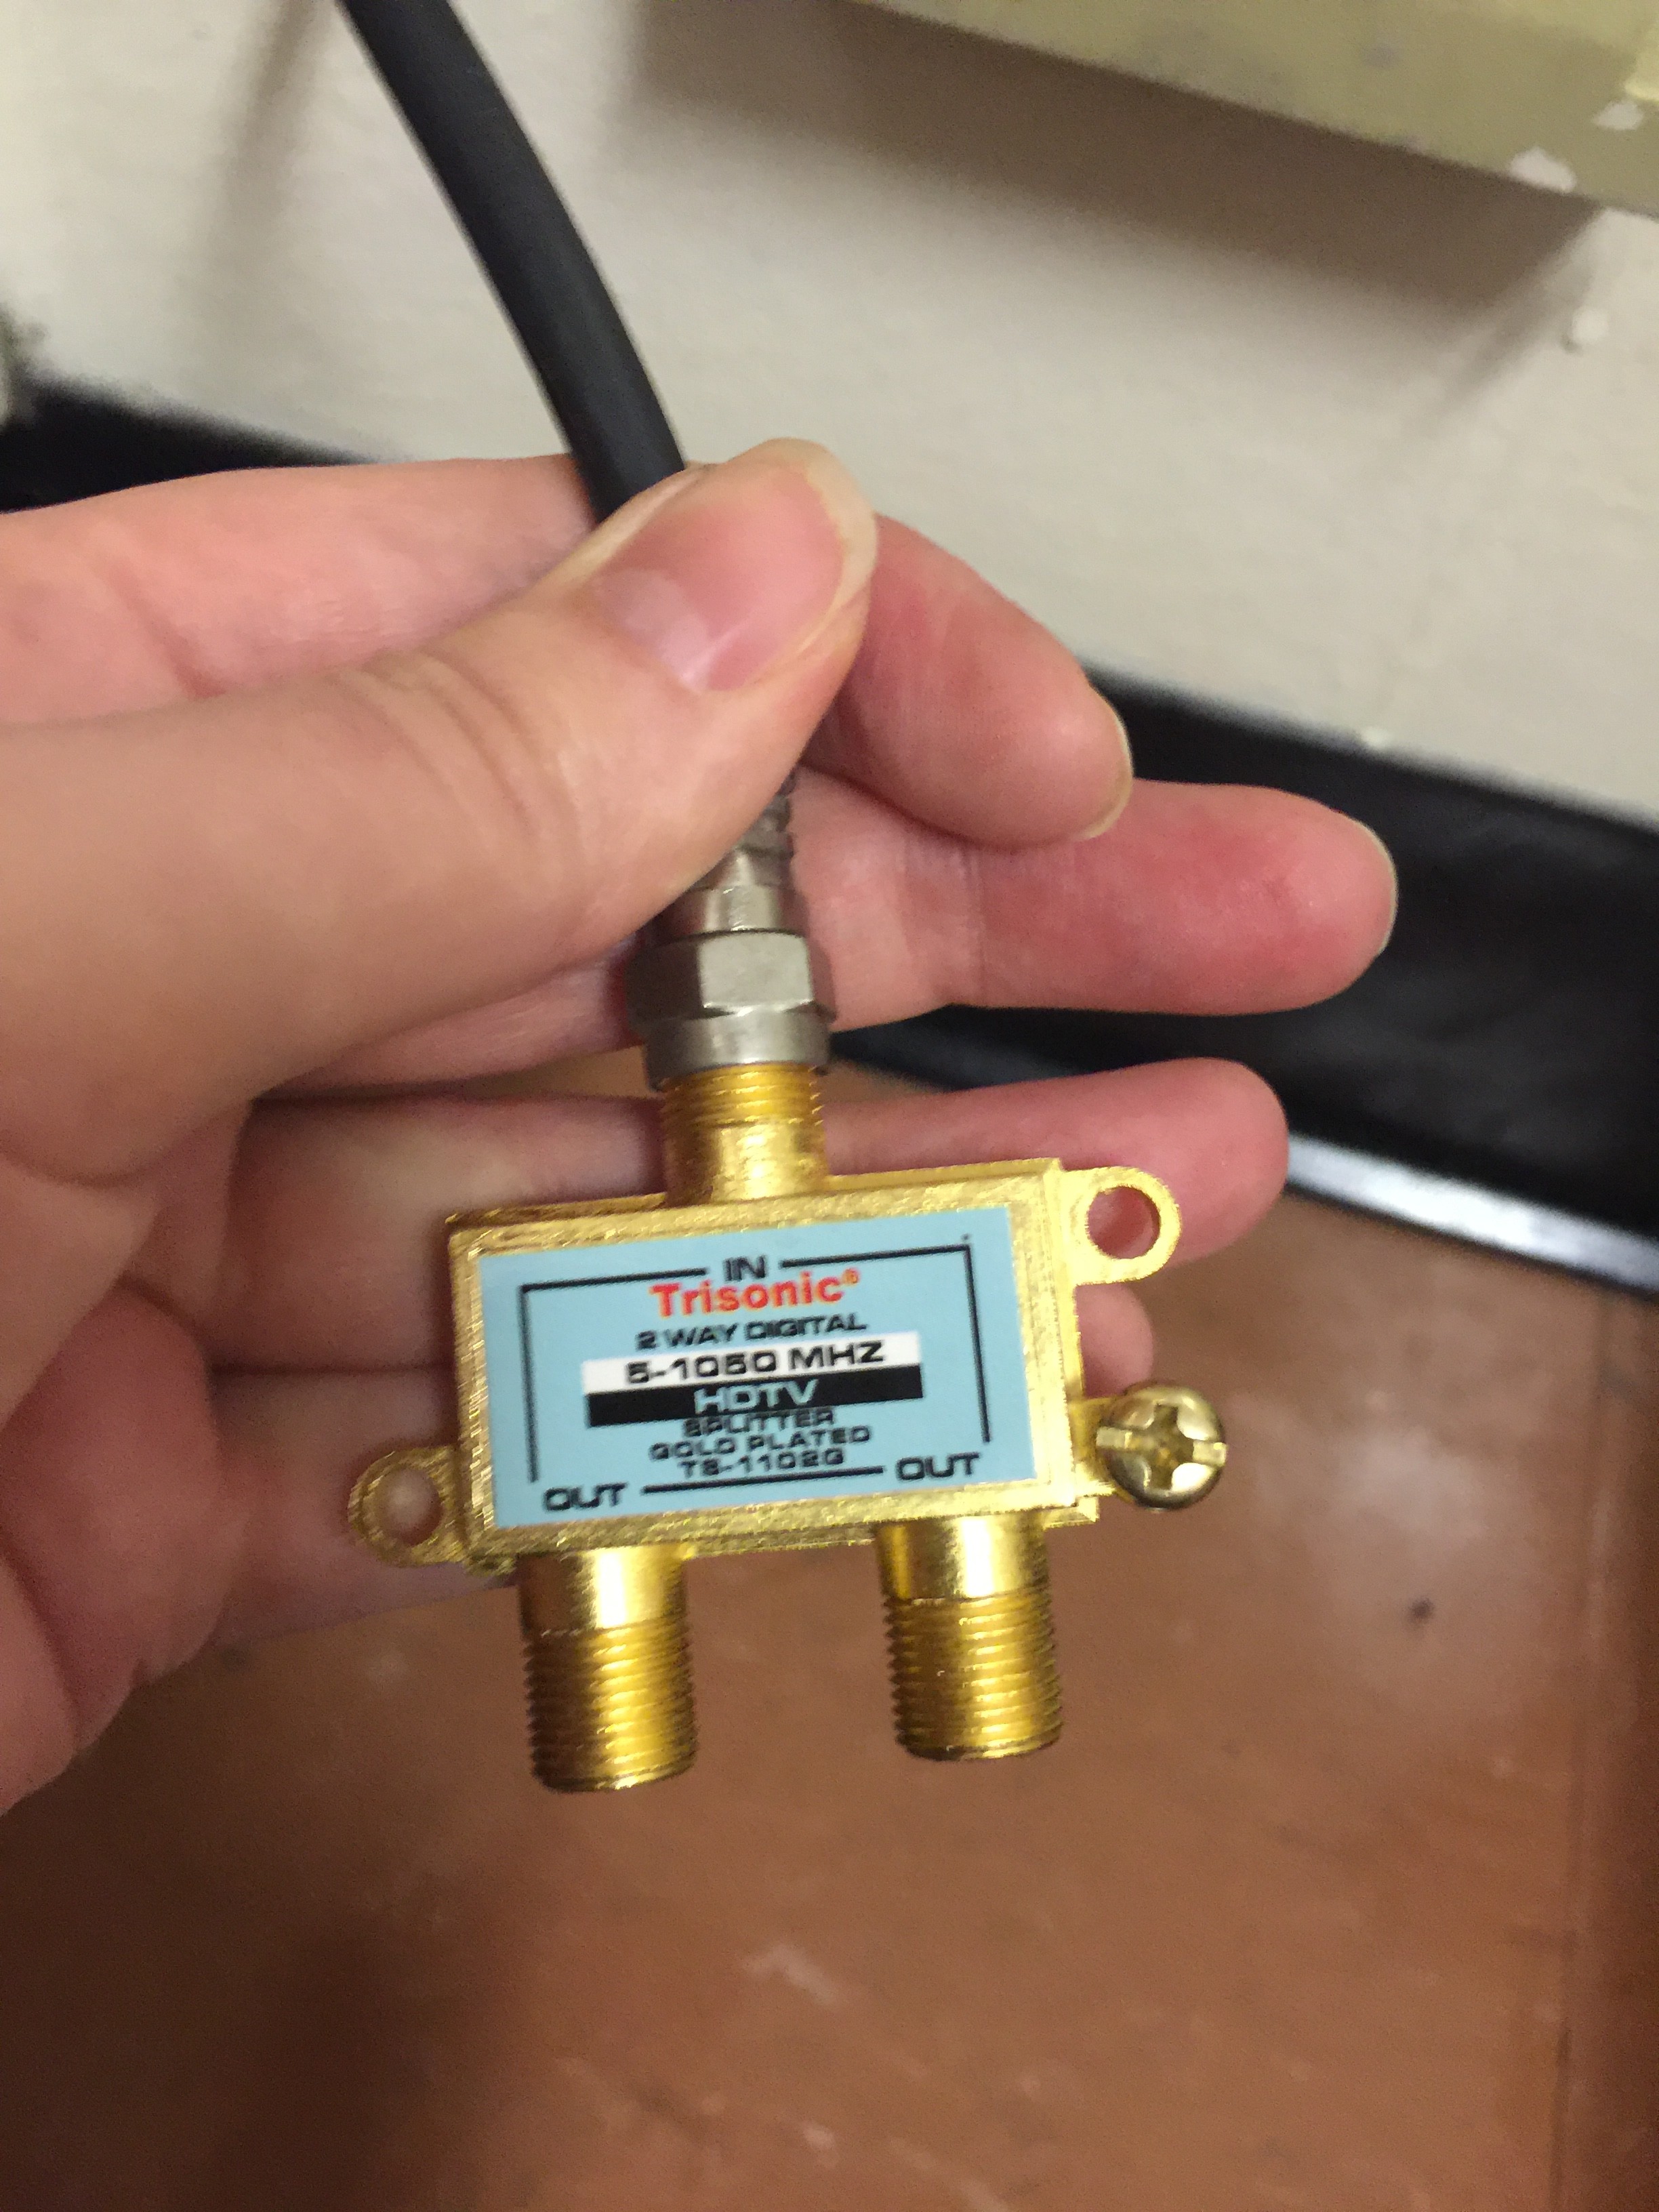 Correct connections with a Cable Splitter - previous Resident may have left